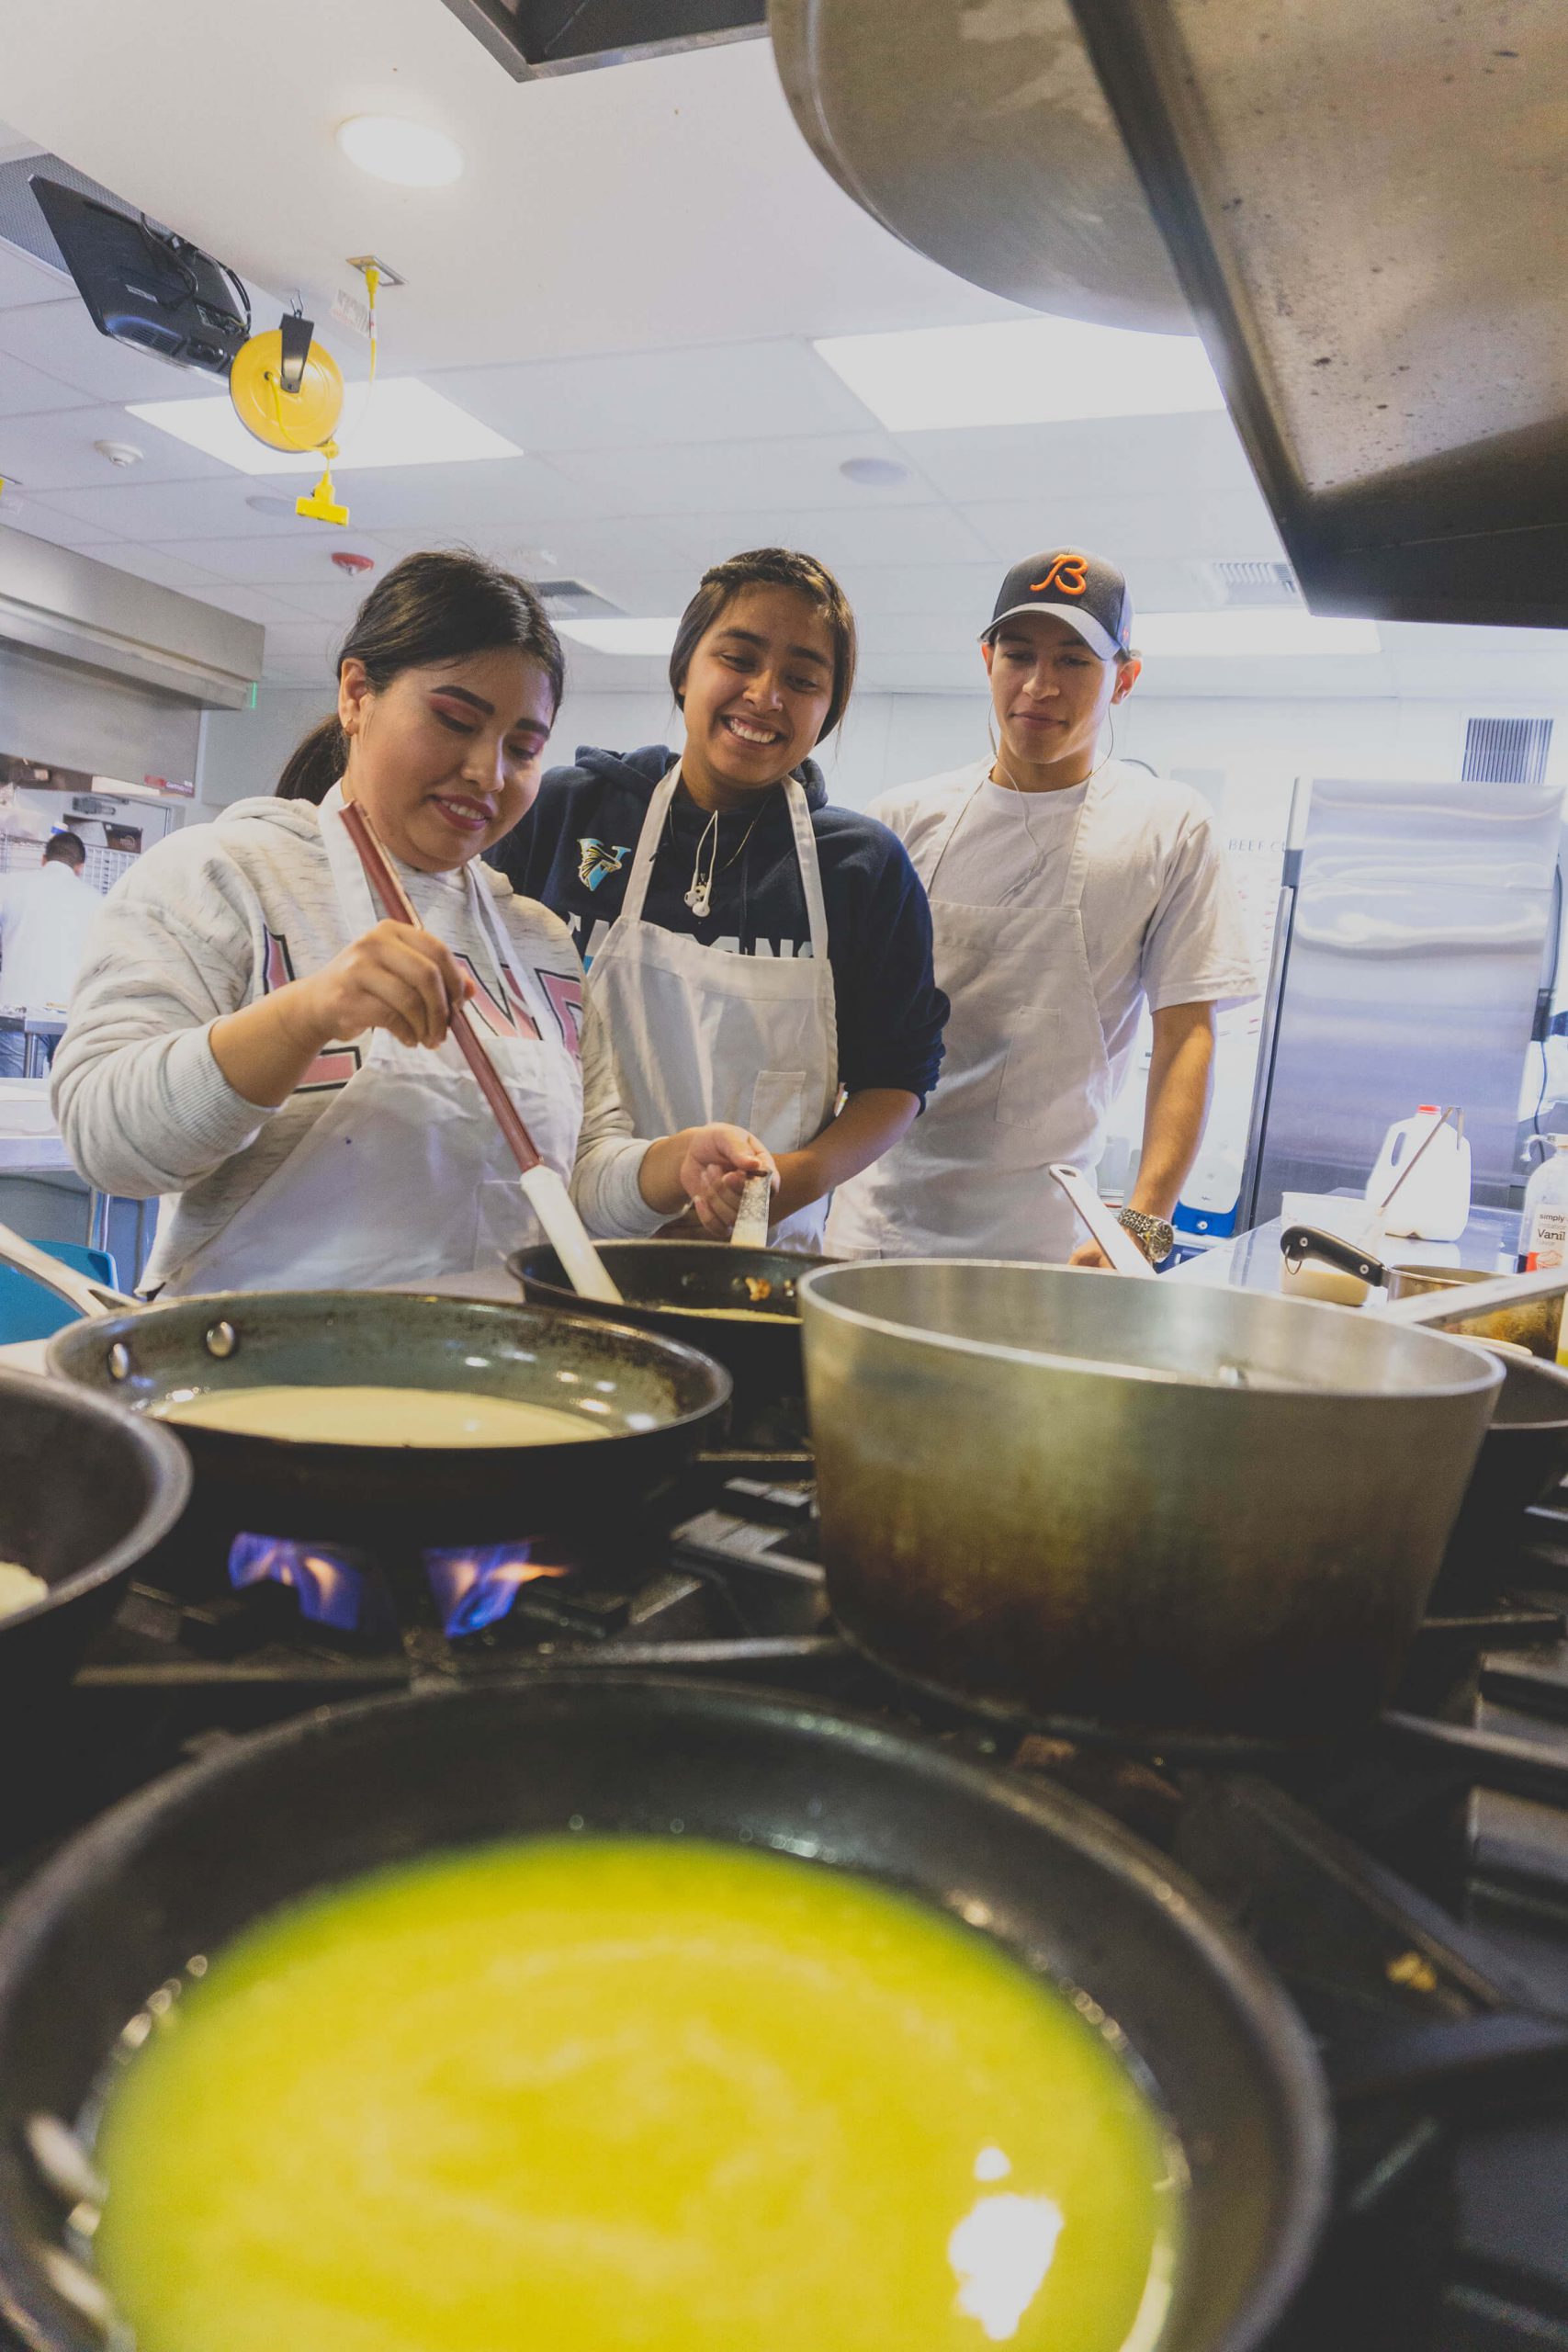 Chefs in training cook up a reduction recipe for culinary arts.